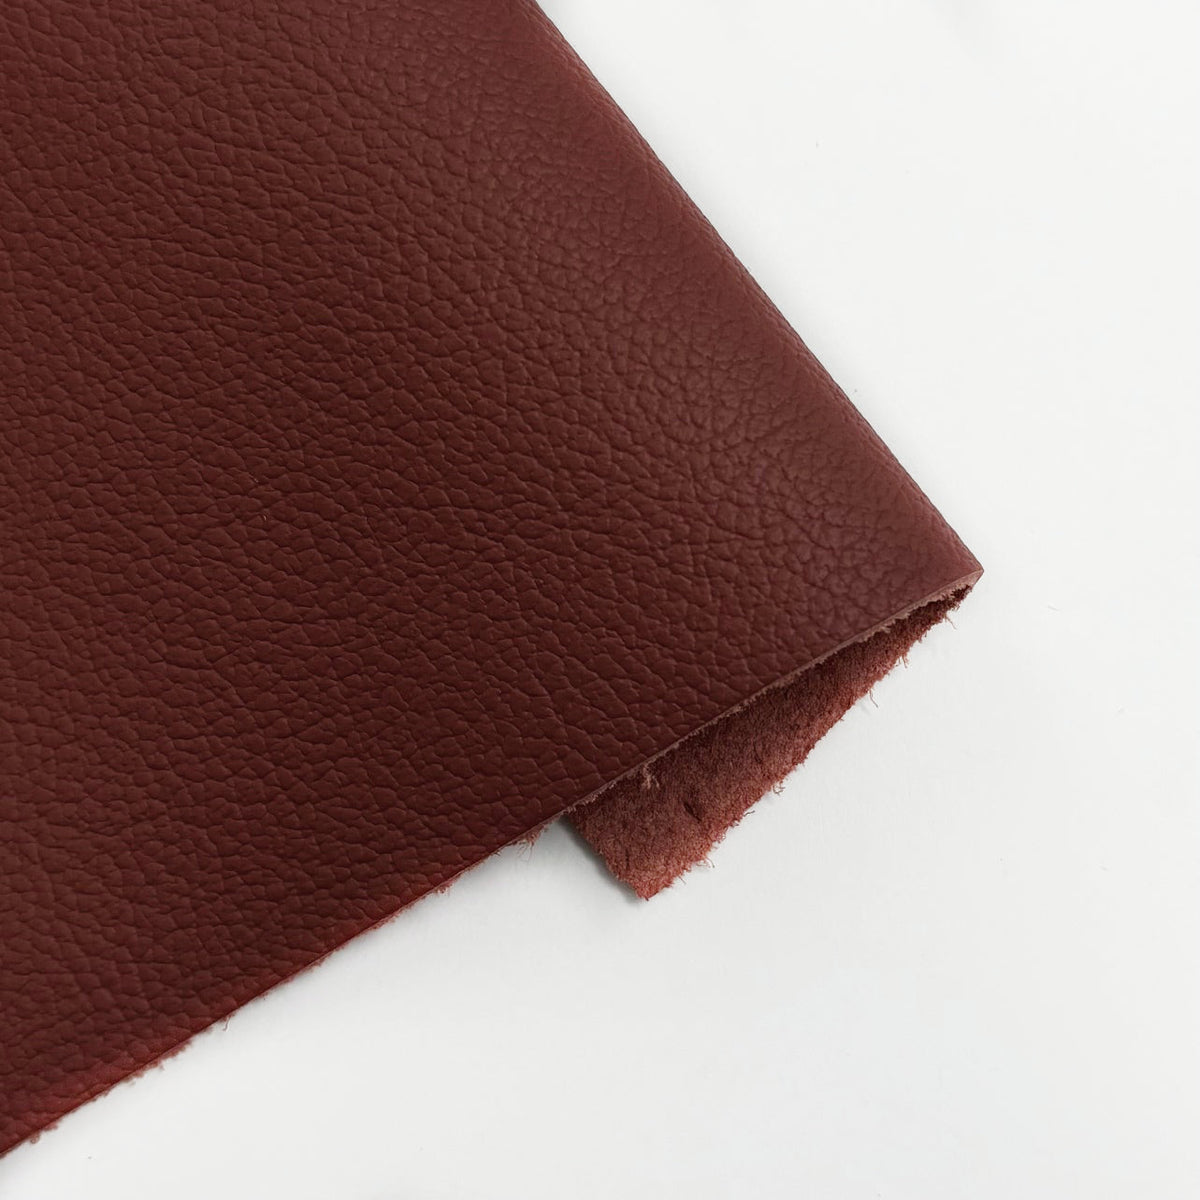 Swatches | Argus German Upholstery Embossed Flame Retardant Cow Leather